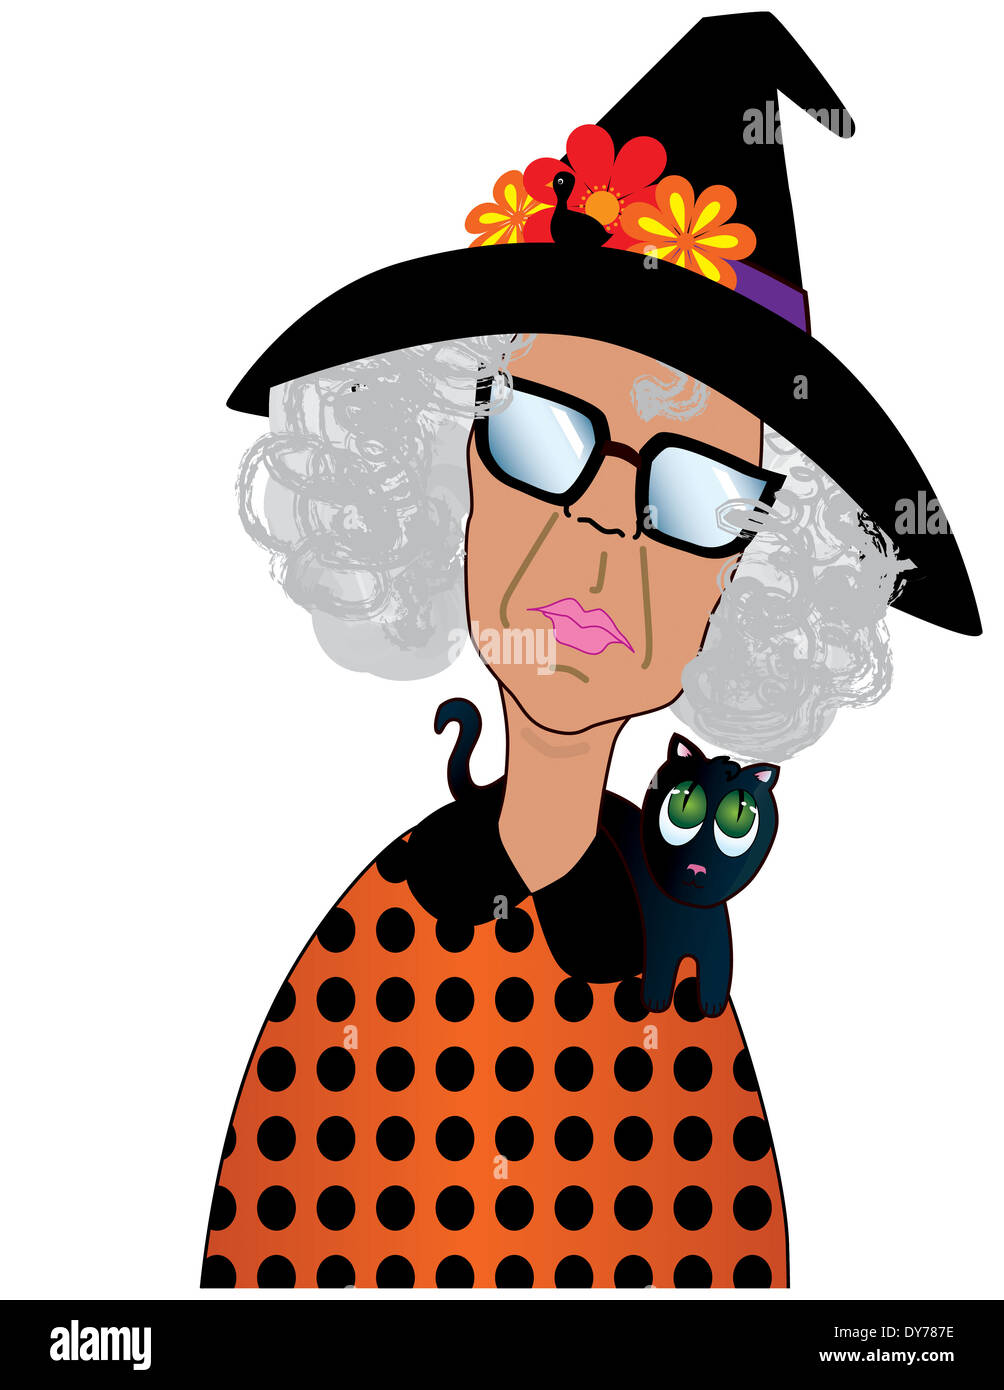 Fun Cartoon of a Grumpy Old Lady Dress for Halloween with a Black Cat Stock Photo